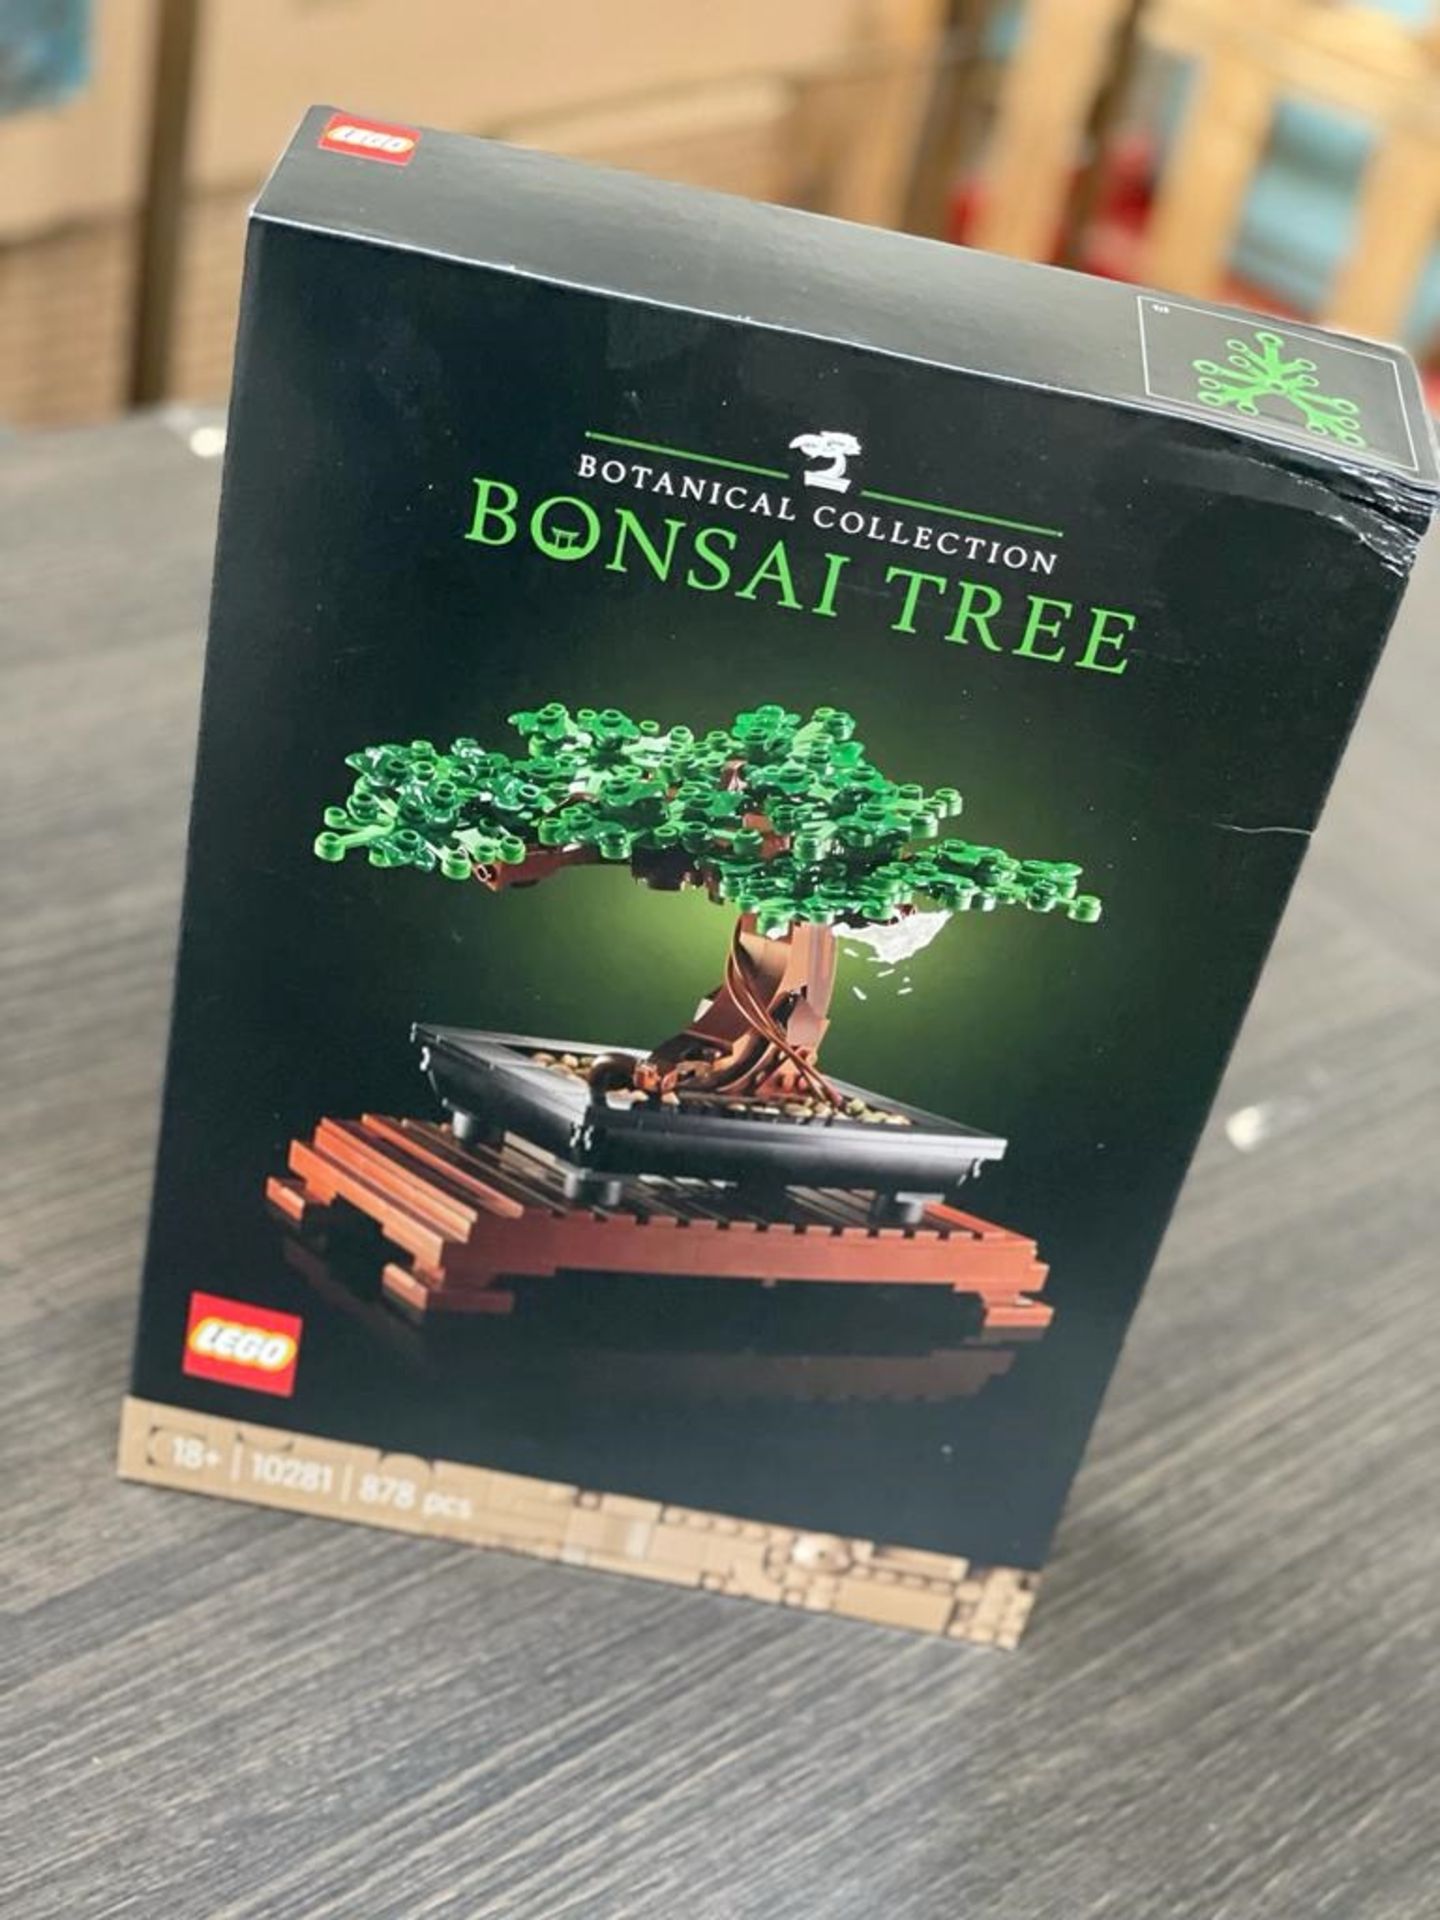 1 x Lego Botanical Collection Bonsai Tree 878 Pieces 18+ (10281) - Brand New - CL987 - Ref: - Image 3 of 3